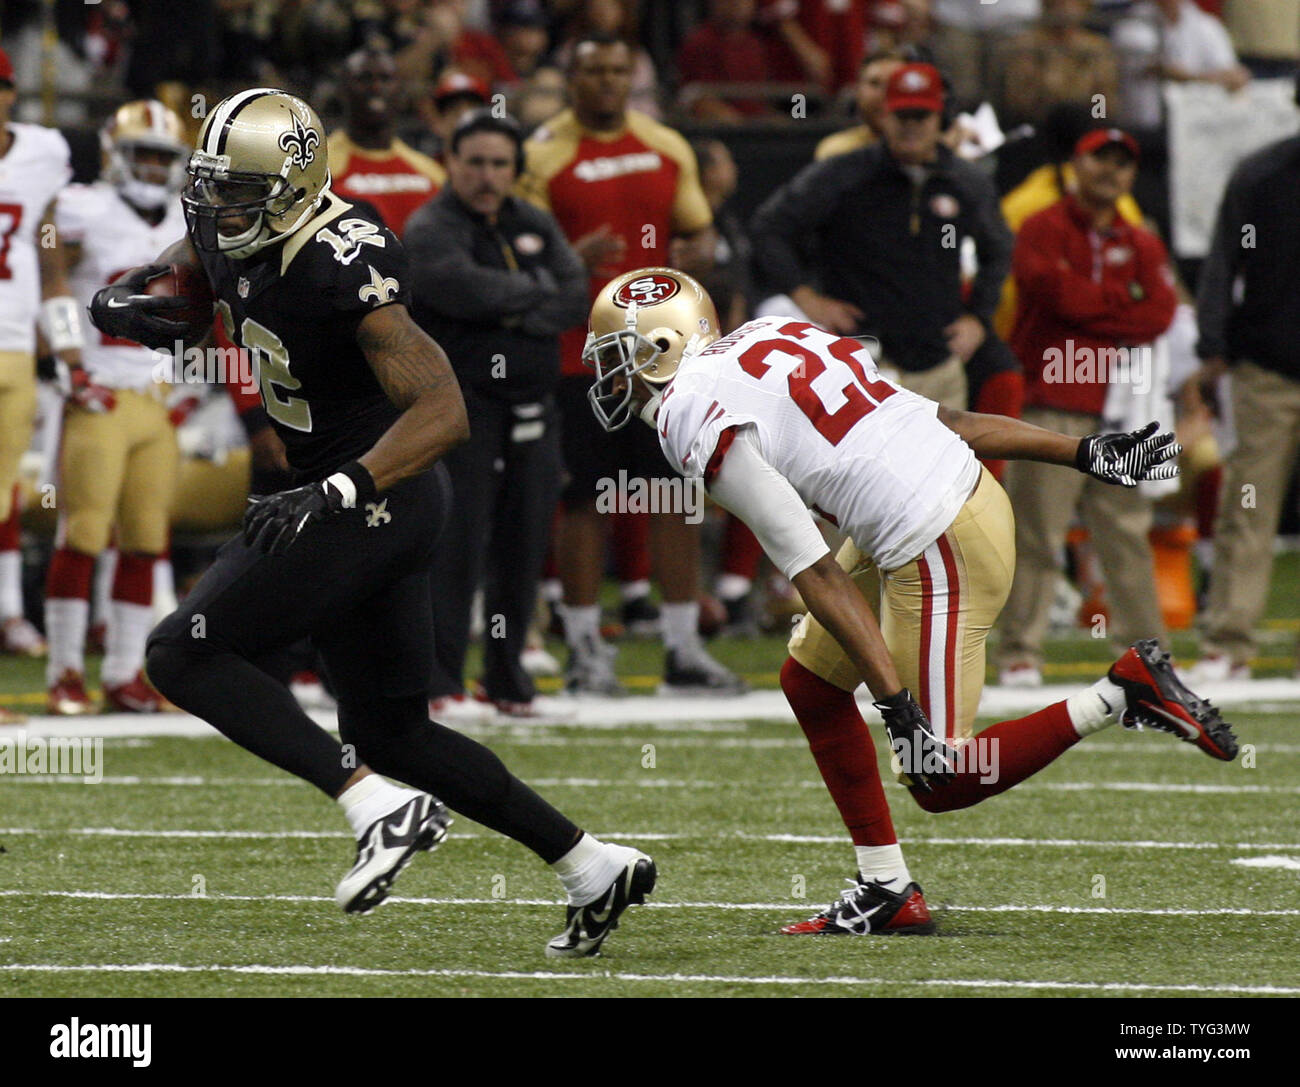 New Orleans Saints wide receiver Marques Colston (12) slips past San Francisco 49ers cornerback Carlos Rogers (22) for a 20 yard gain late in the fourth quarter at the Mercedes-Benz Superdome in New Orleans, Louisiana on November 17, 2013. Saints defeated the 49ers 23-20.  UPI/A.J. Sisco Stock Photo